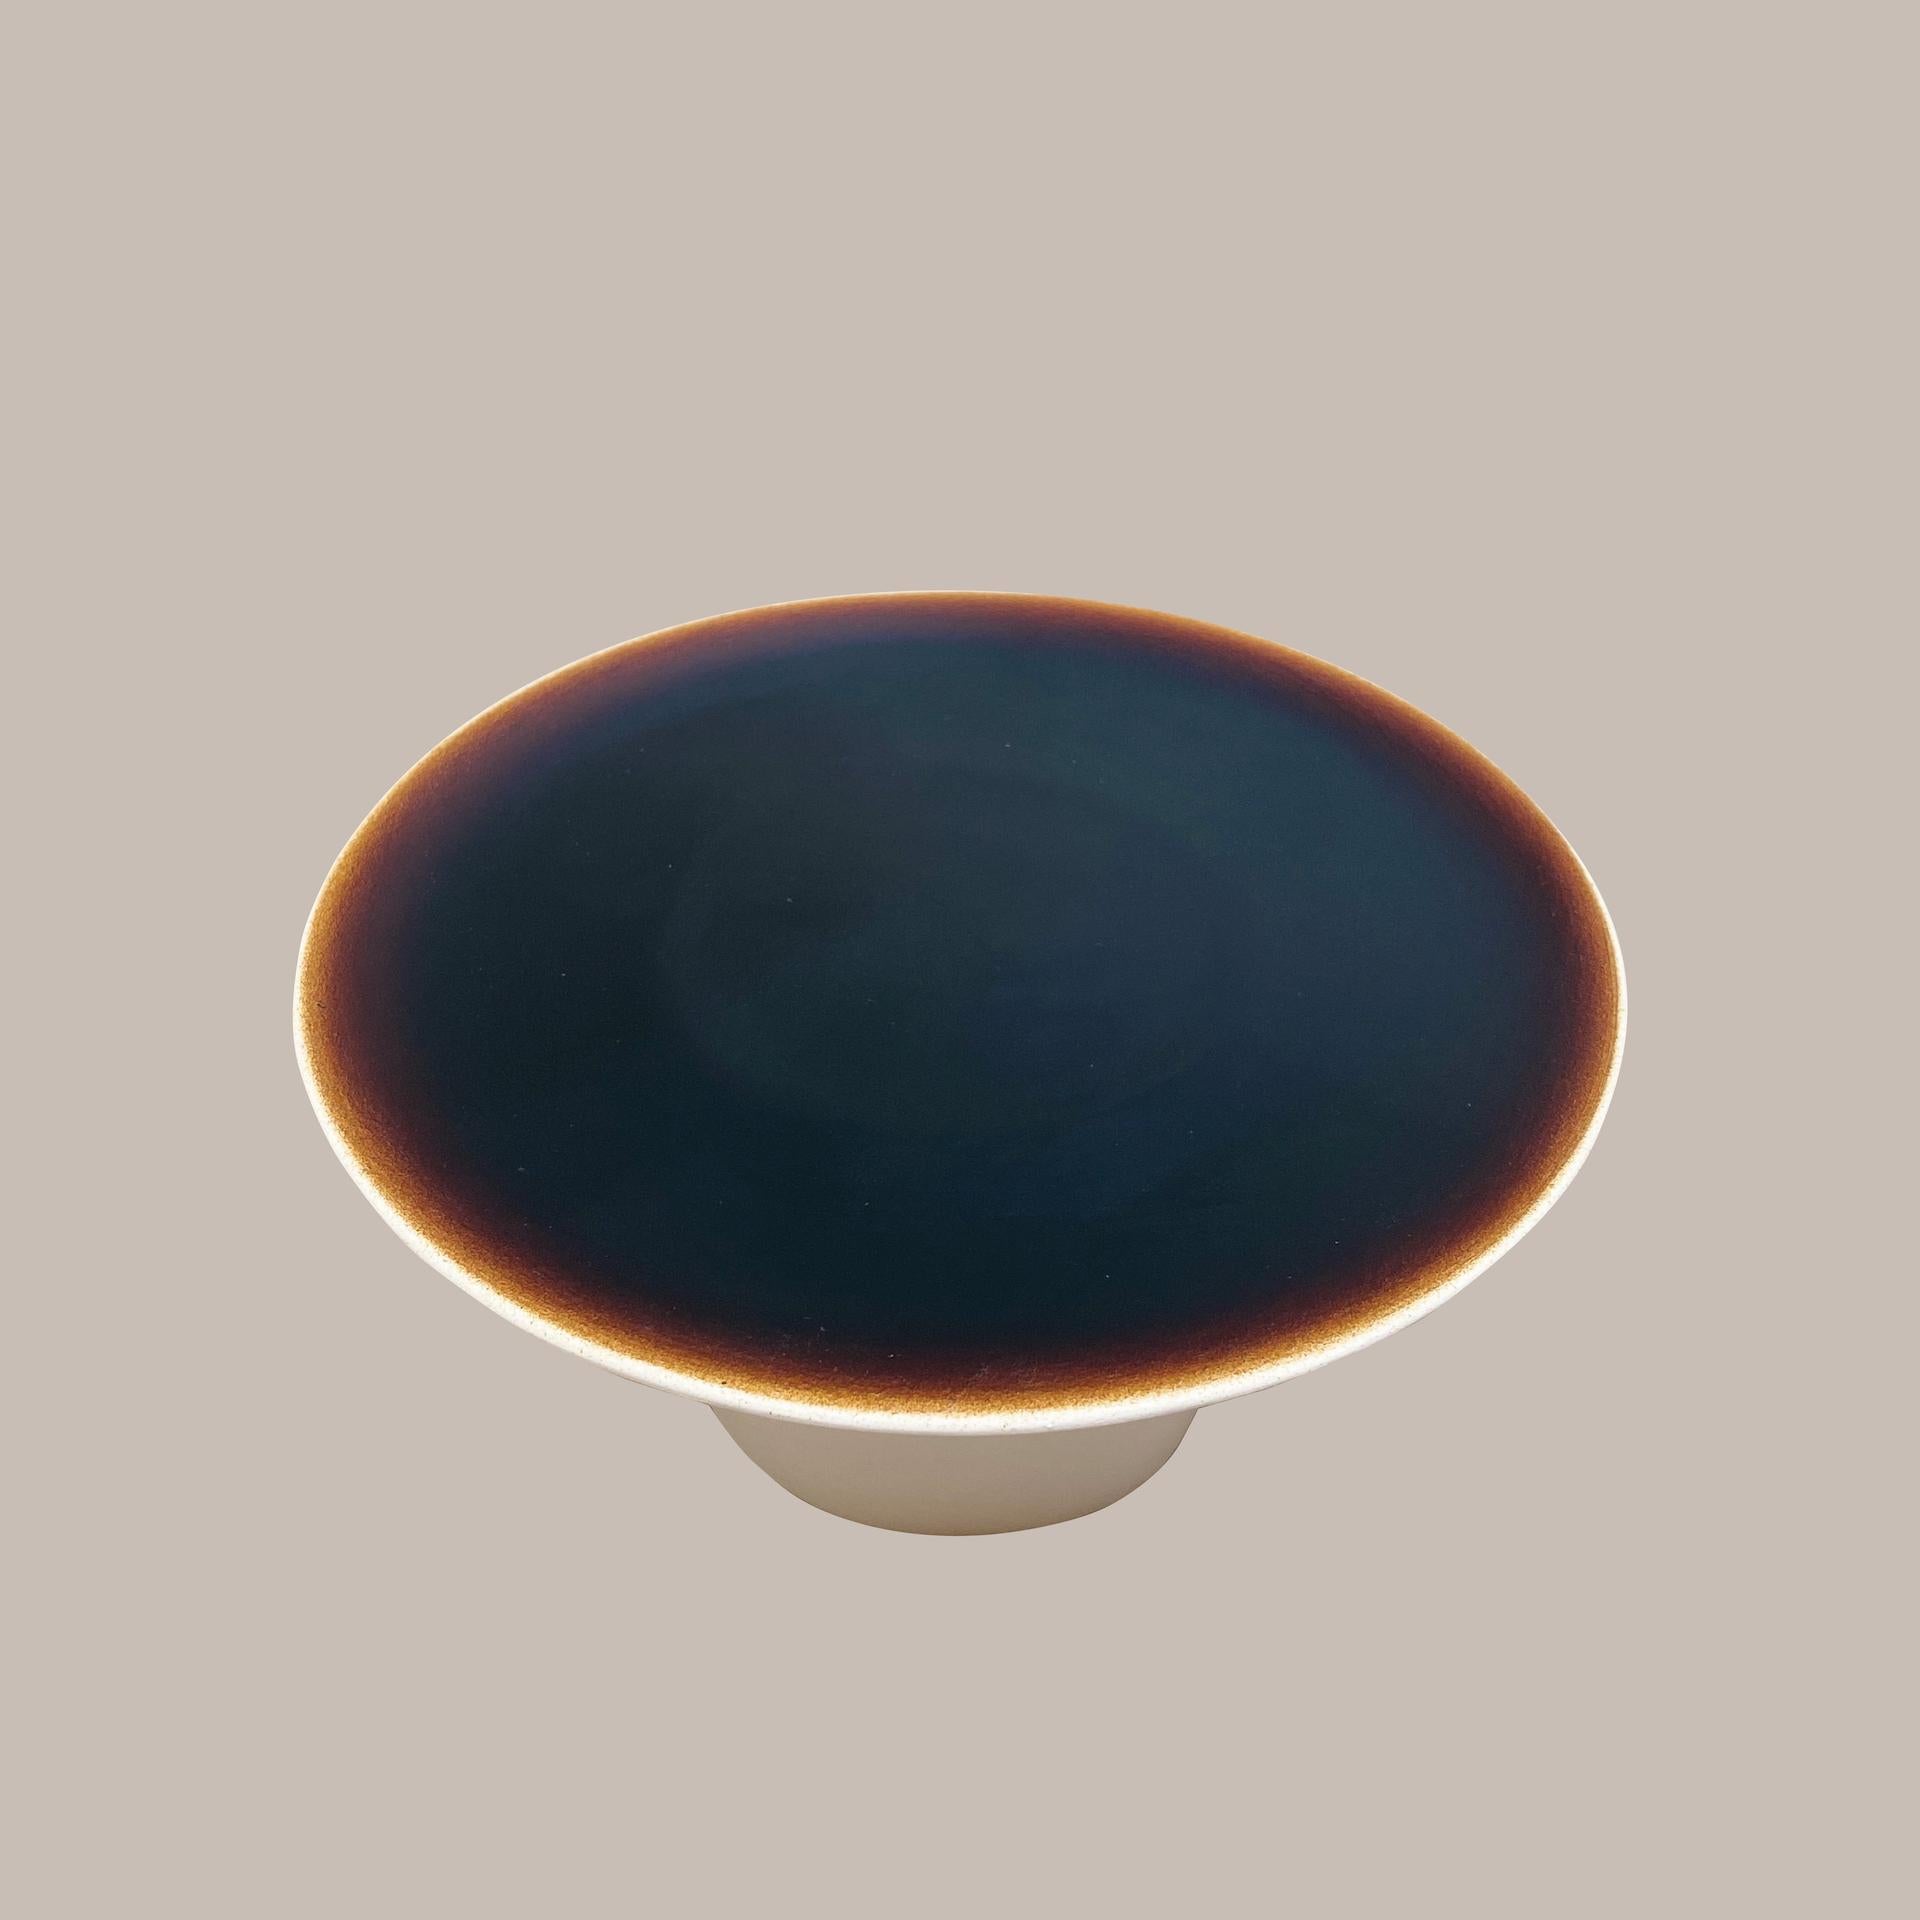 Porcelain Ott Another Paradigmatic Handmade Ceramic Cup by Studio Yoon Seok-Hyeon